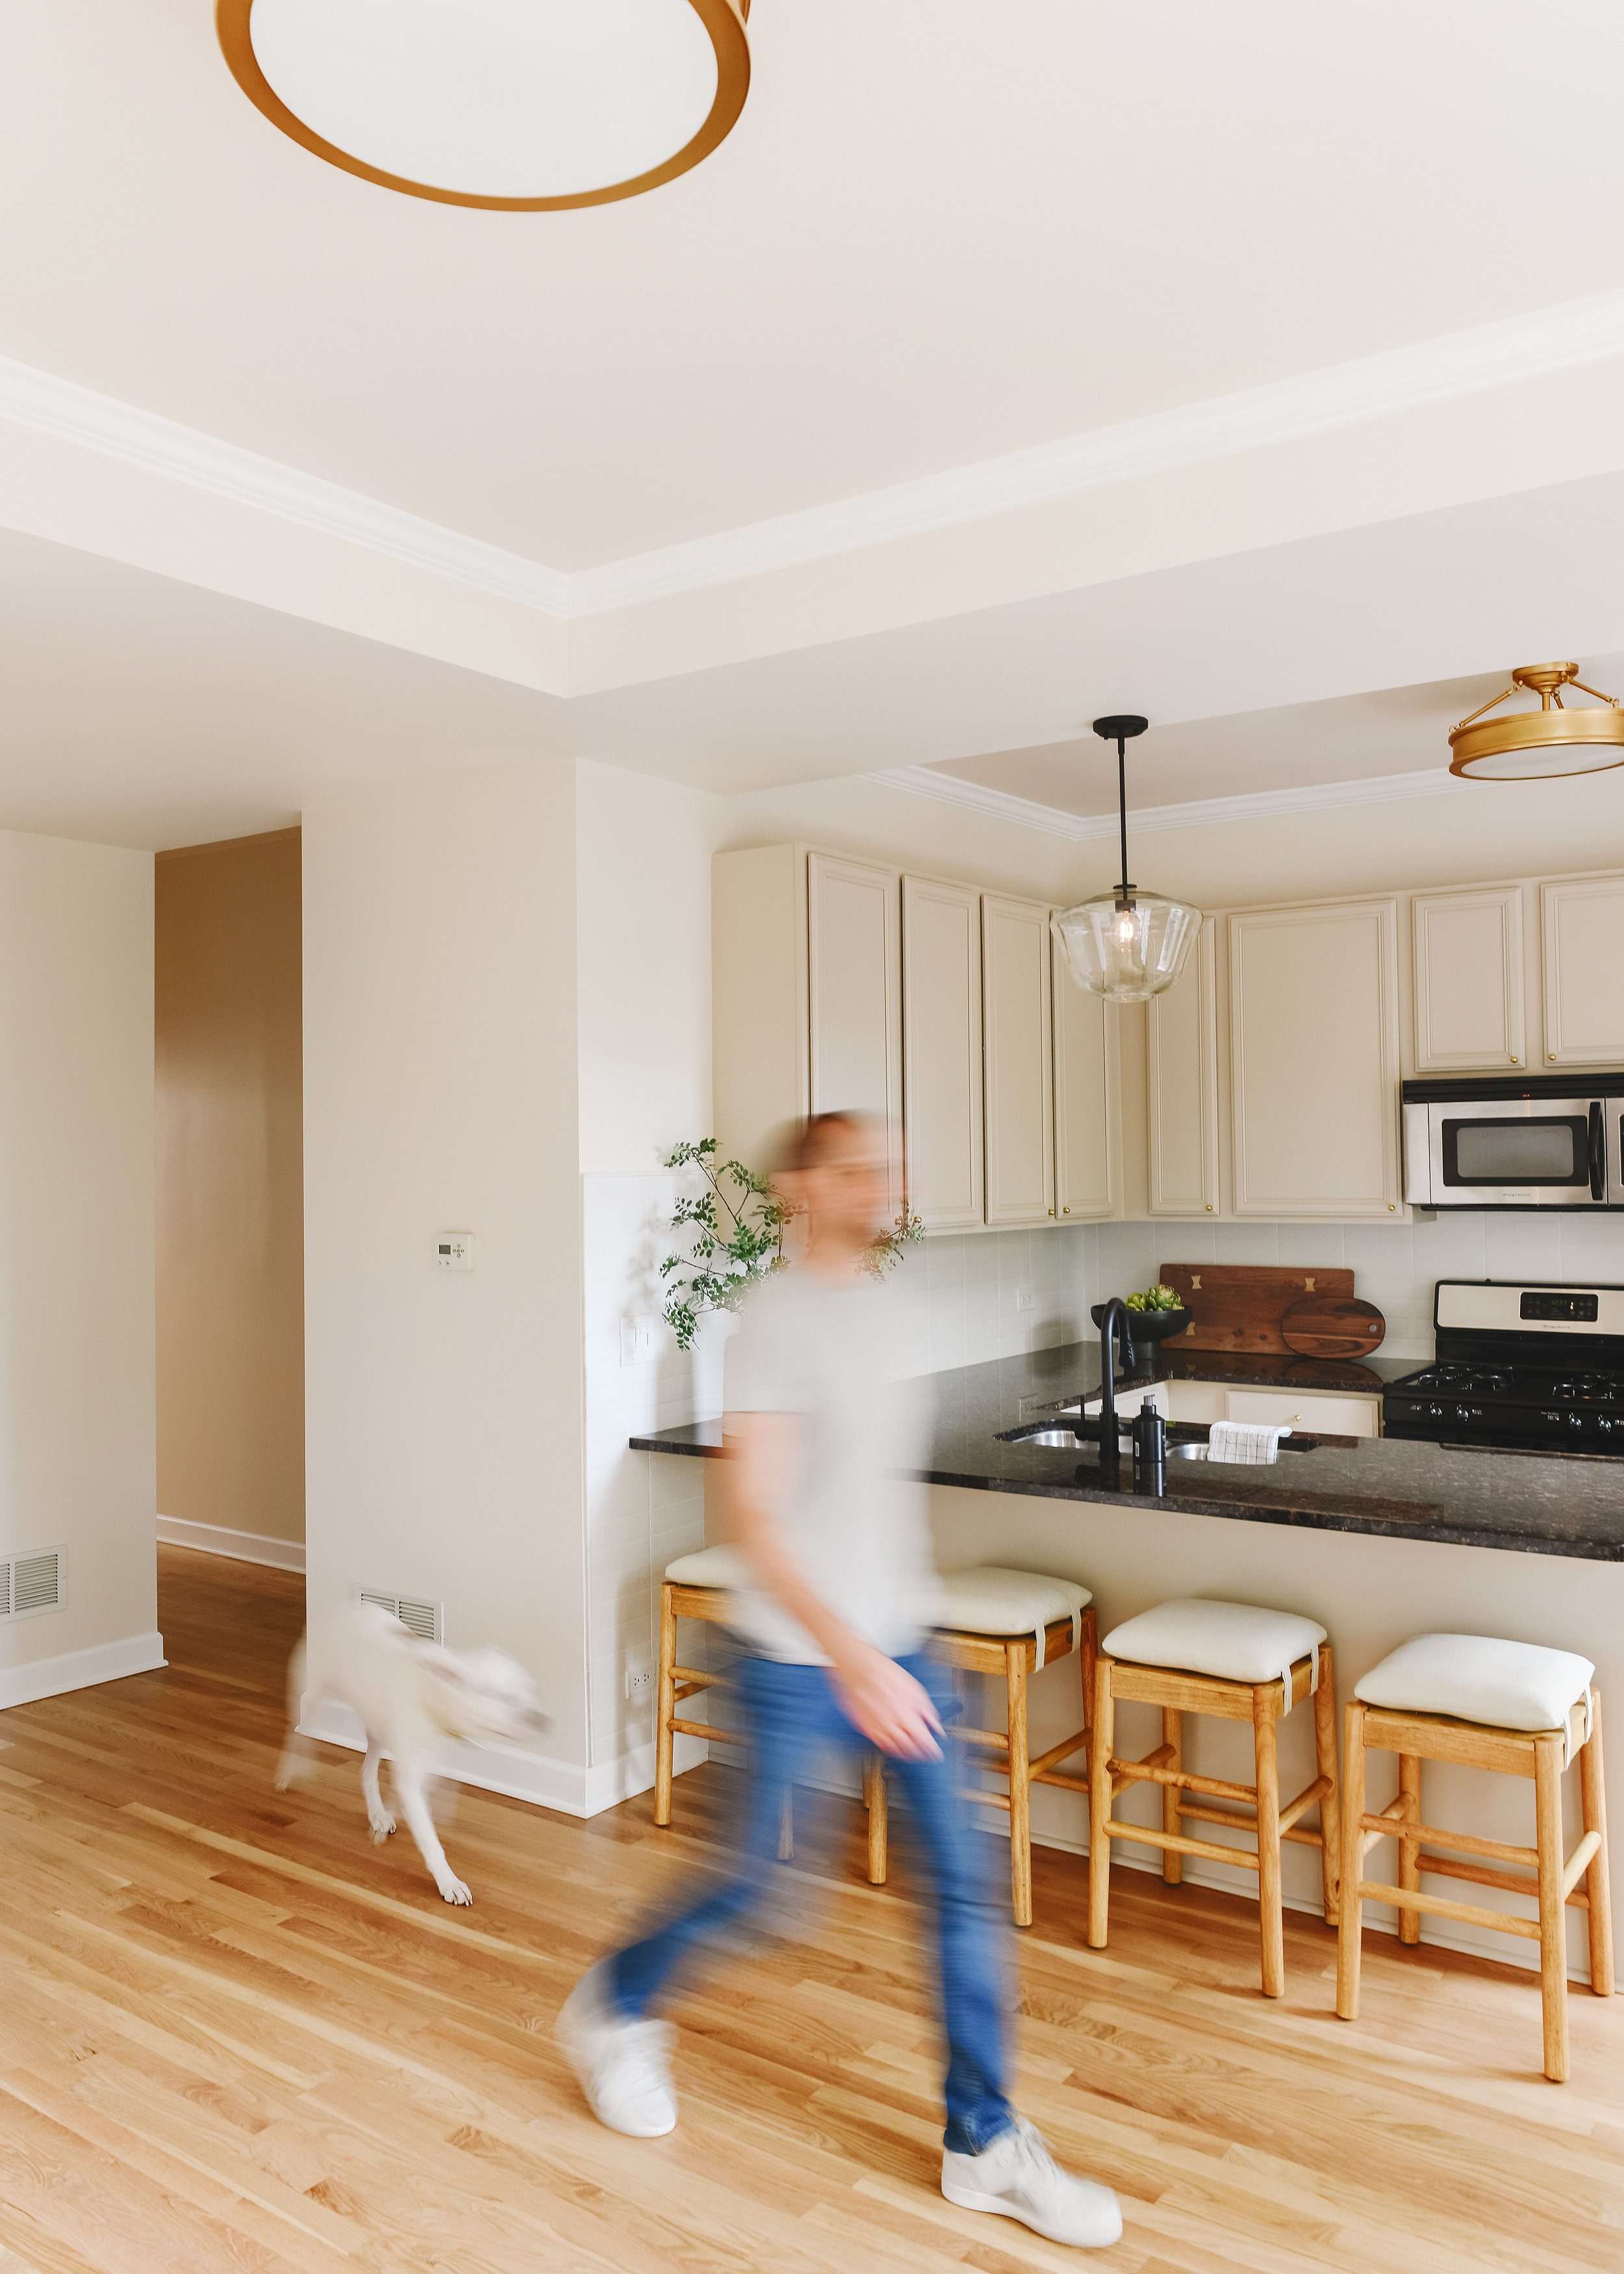 Scott and Catfish walk through the refreshed condo space with fresh paint on the walls and cabinets, refinished oak floors and new lighting. | via Yellow Brick Home